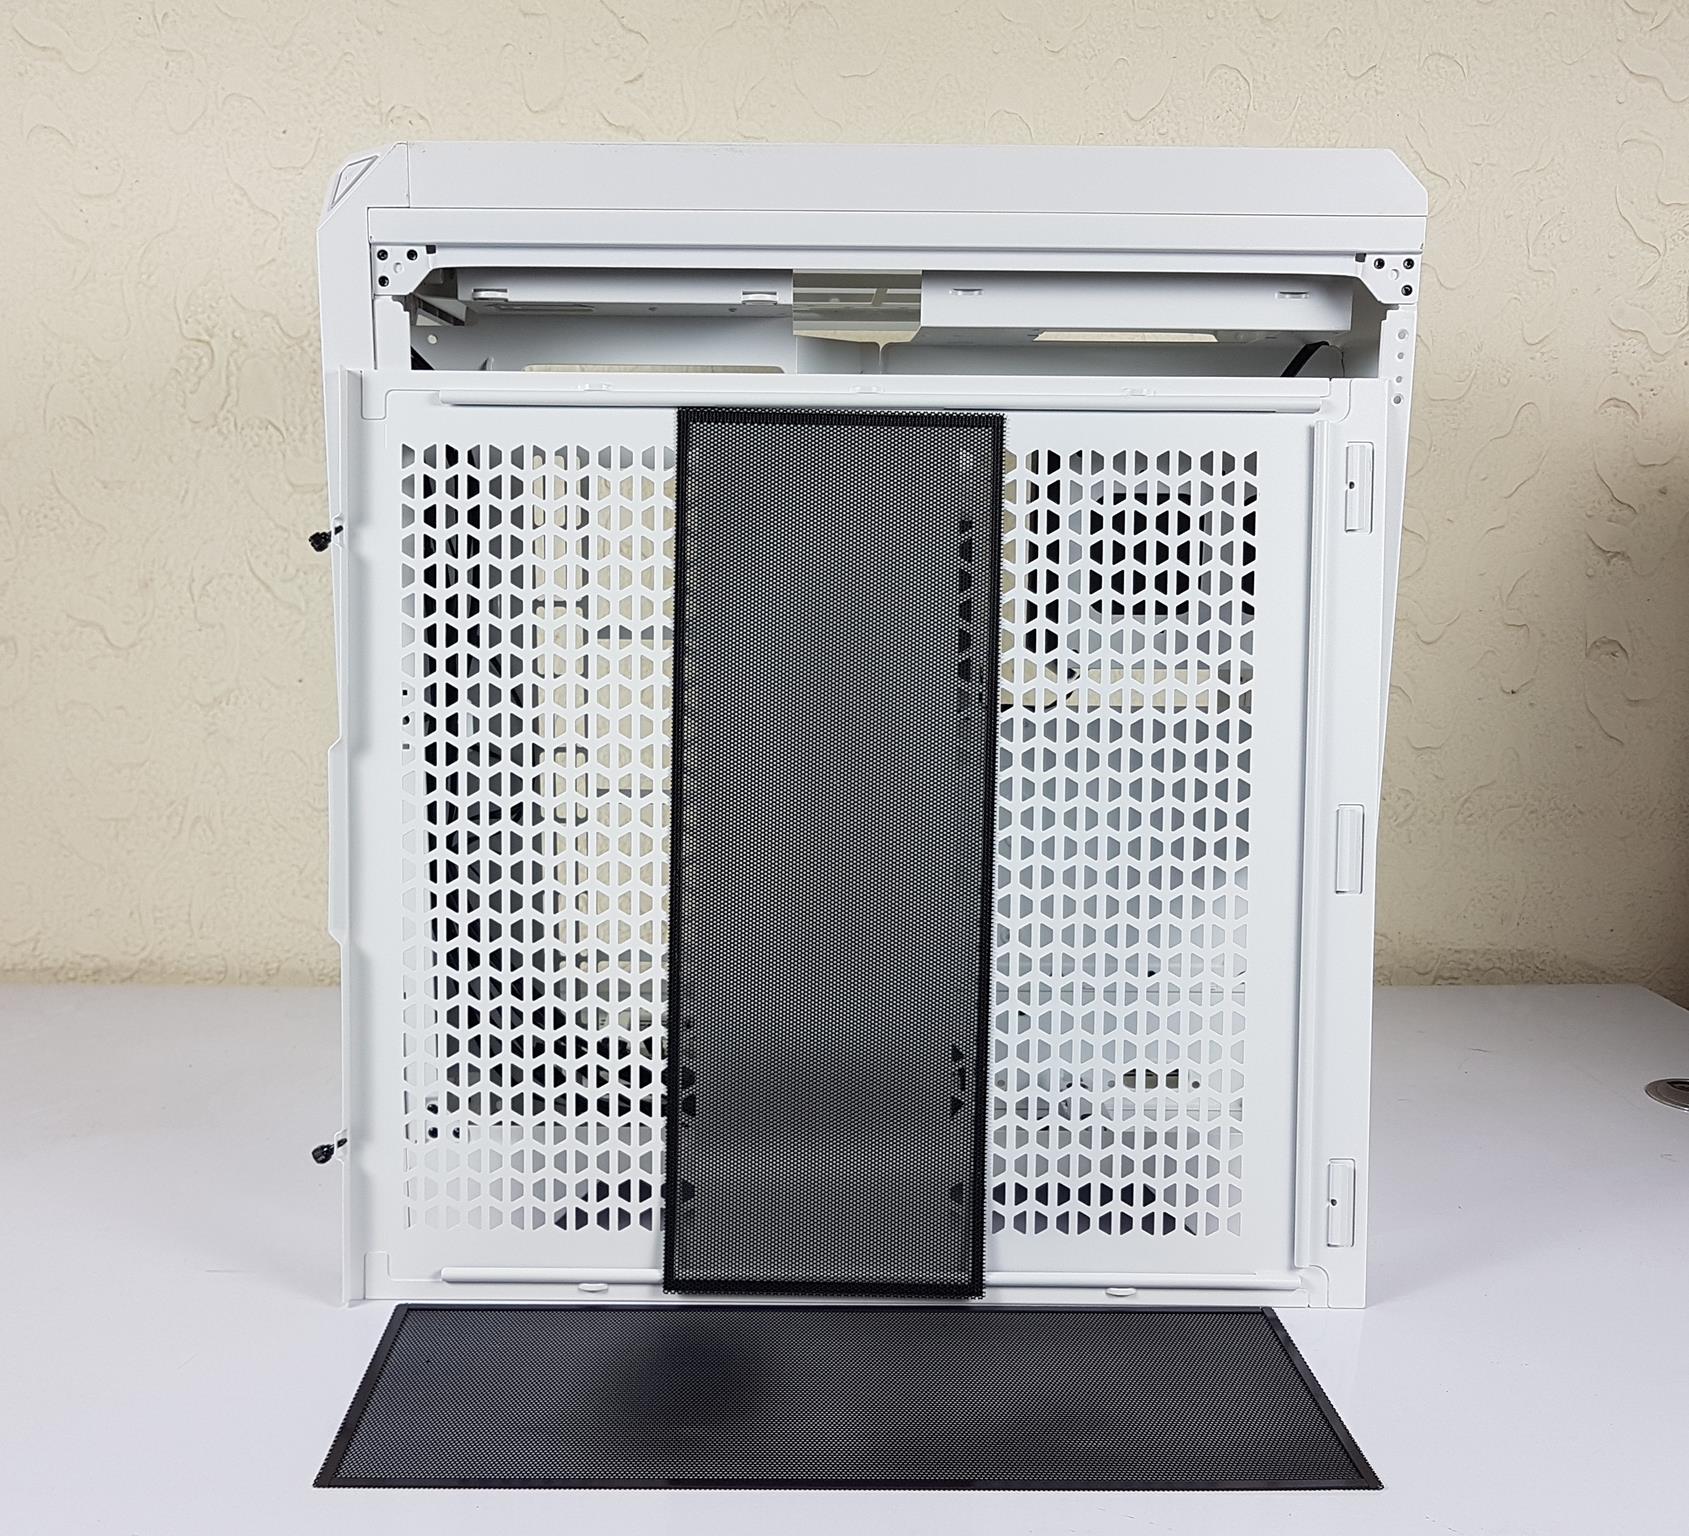 thermaltake view 51 argb edition atx full tower case innerside pannel